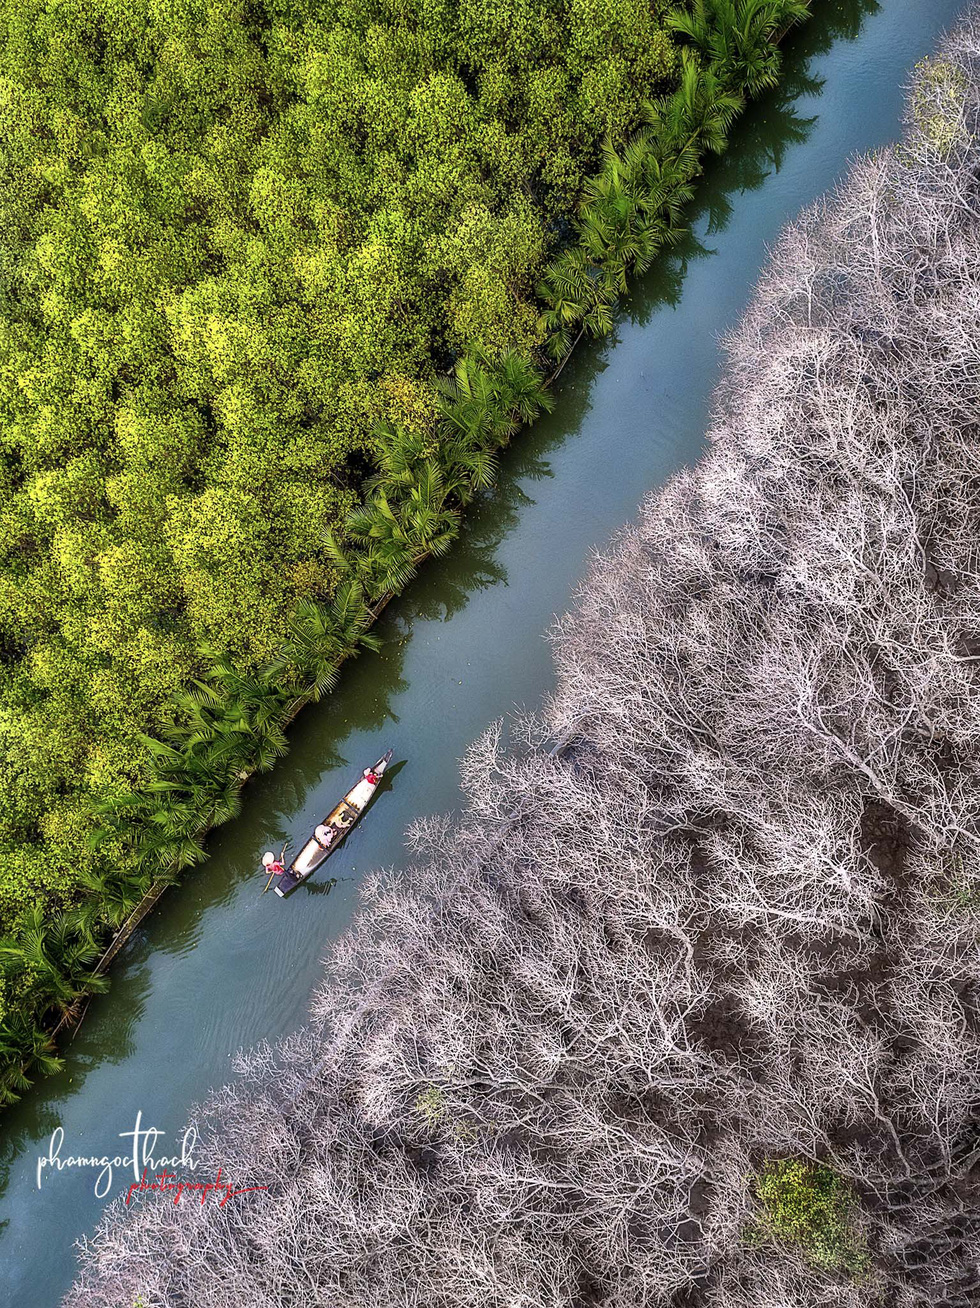 A boat floats near the Ru Cha Forest in Thua Thien-Hue Province, central Vietnam. Photo: Pham Ngoc Thach